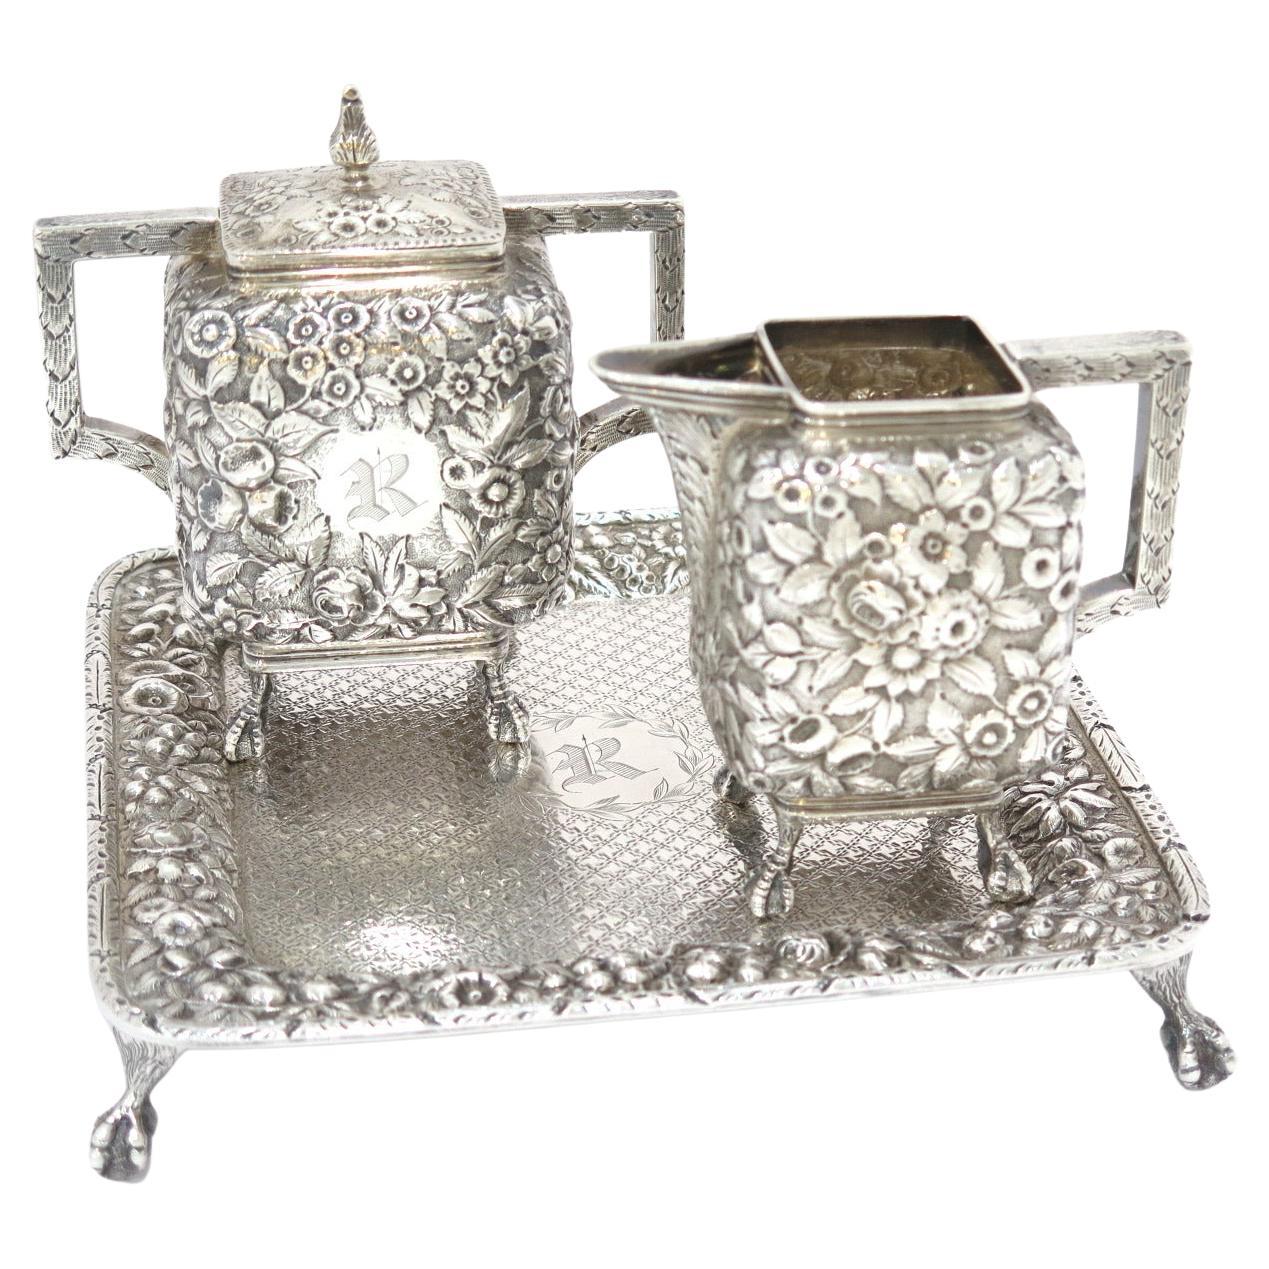 Coin Silver Antique American Floral Repousse Mini Sugar Bowl, Creamer & Tray Set For Sale